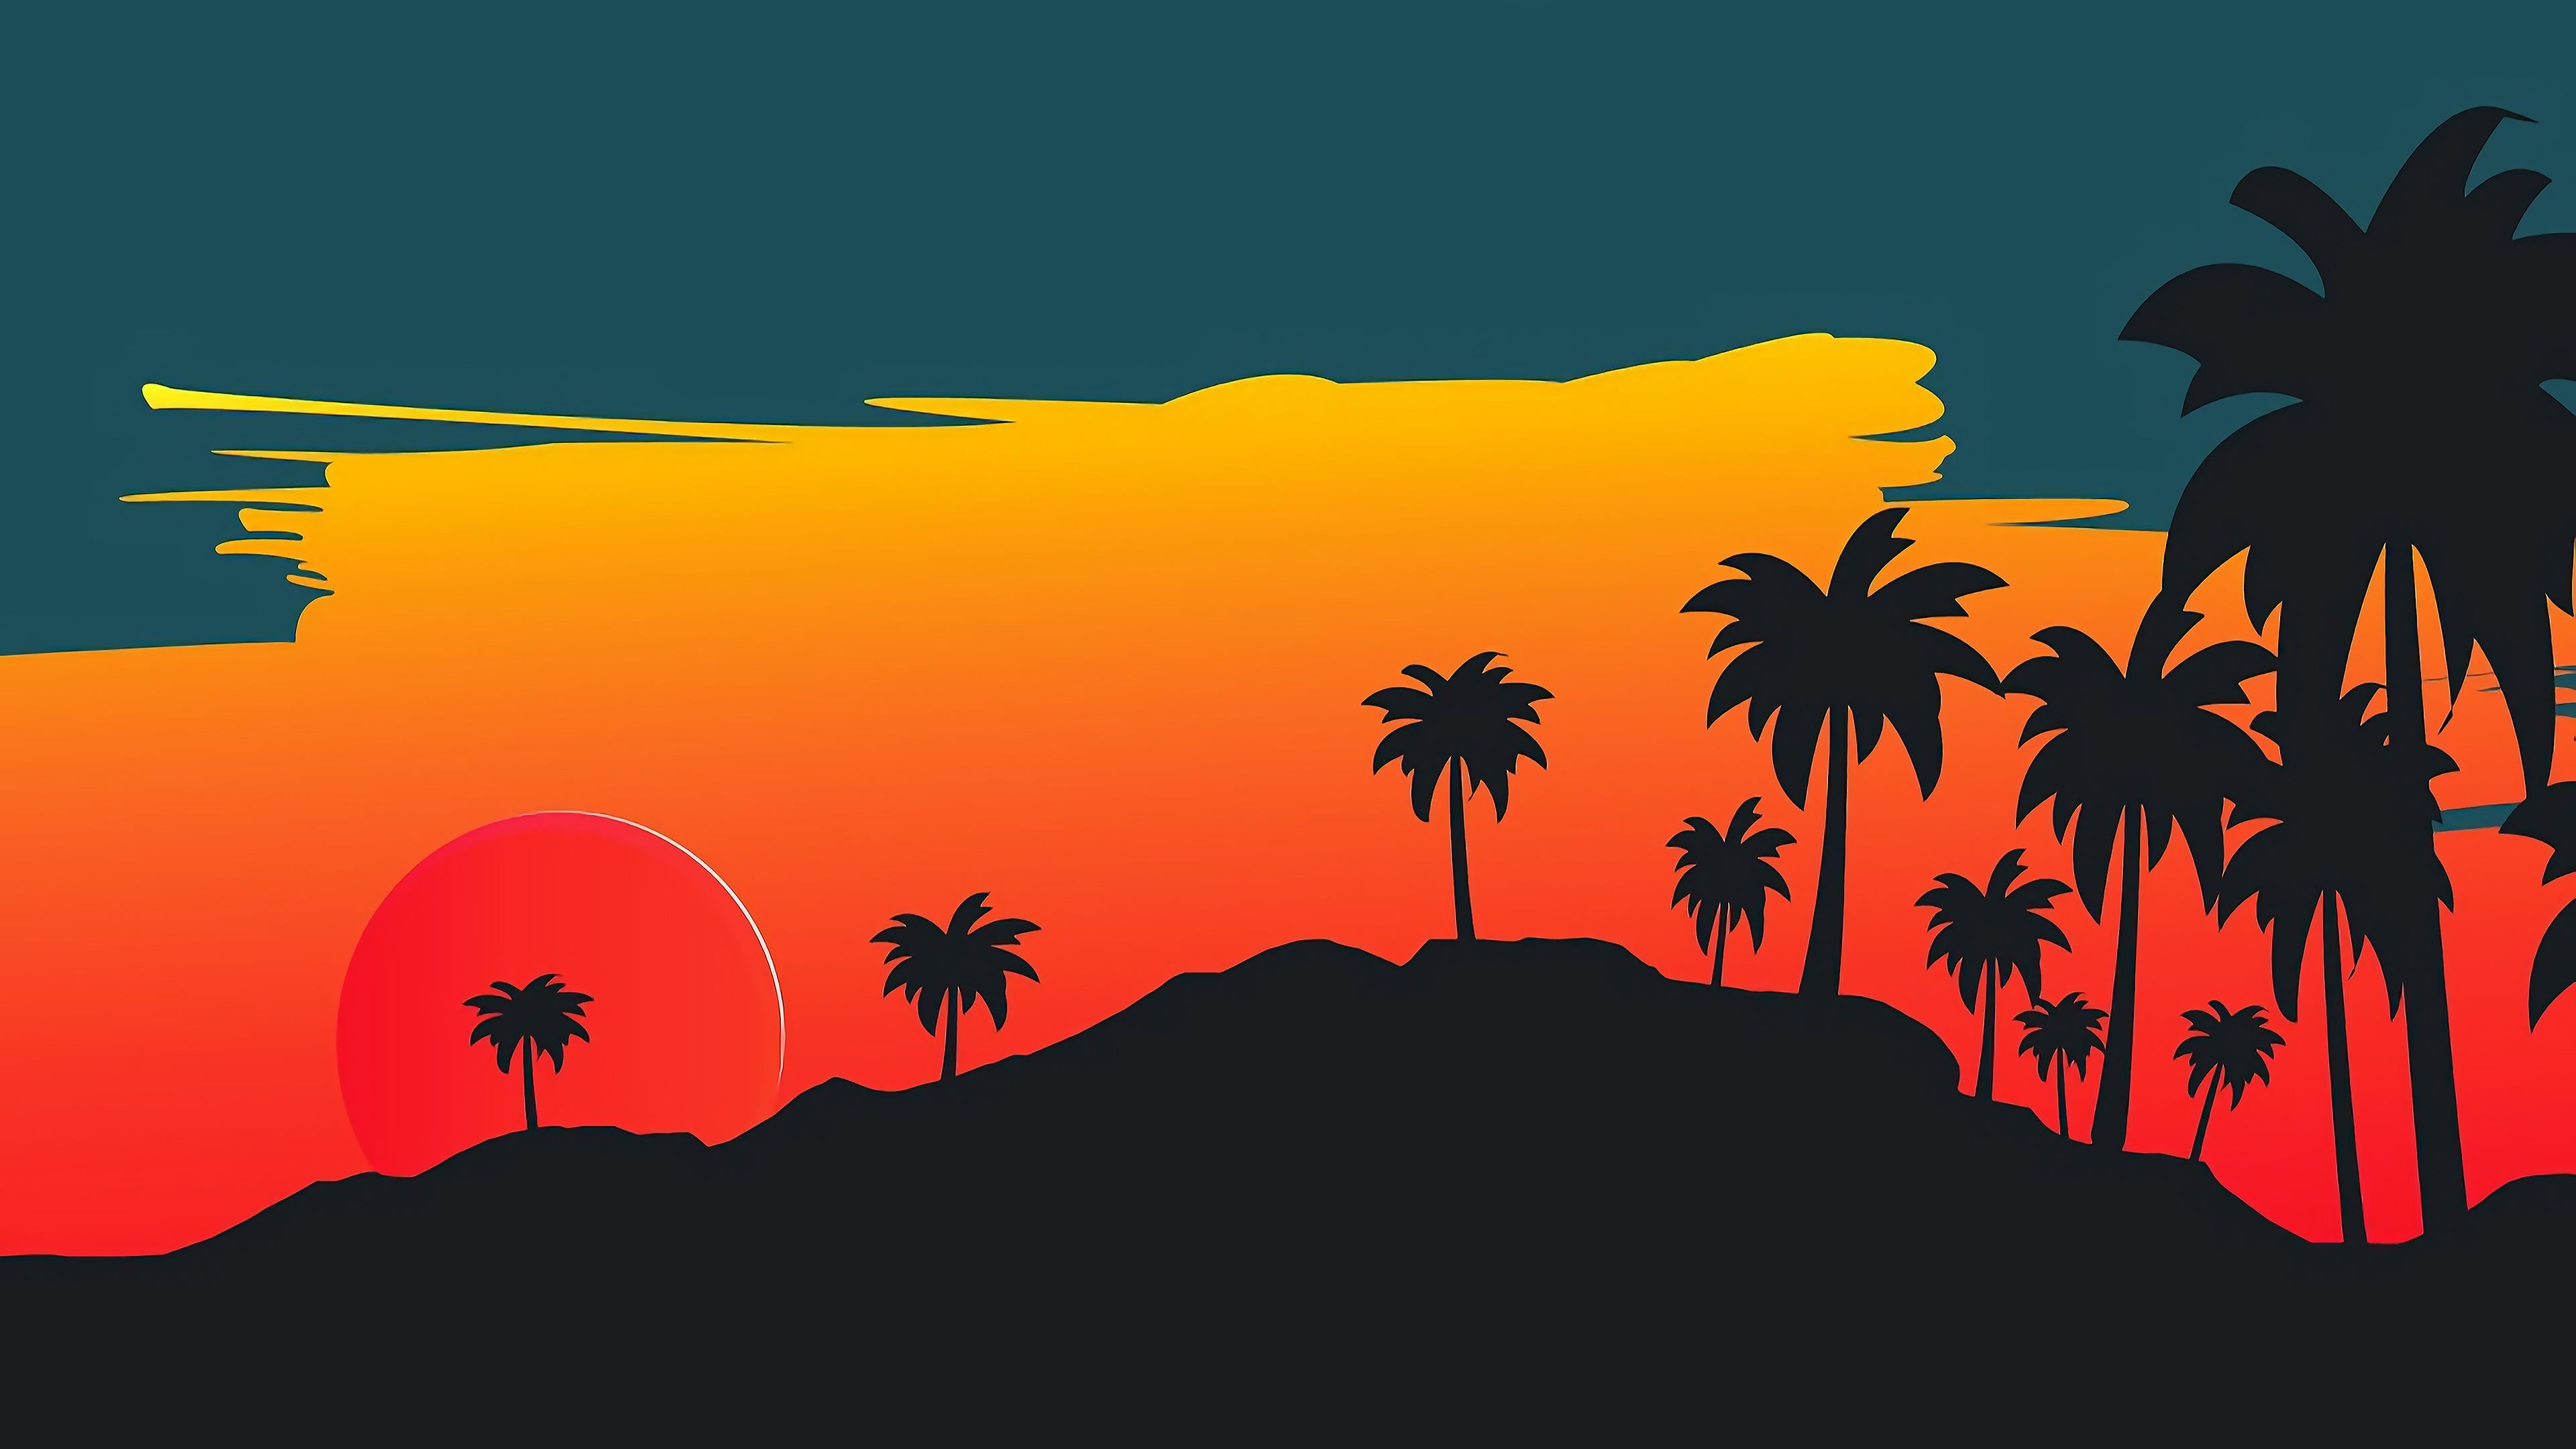 A sunset scene with palm trees and mountains - Tropical